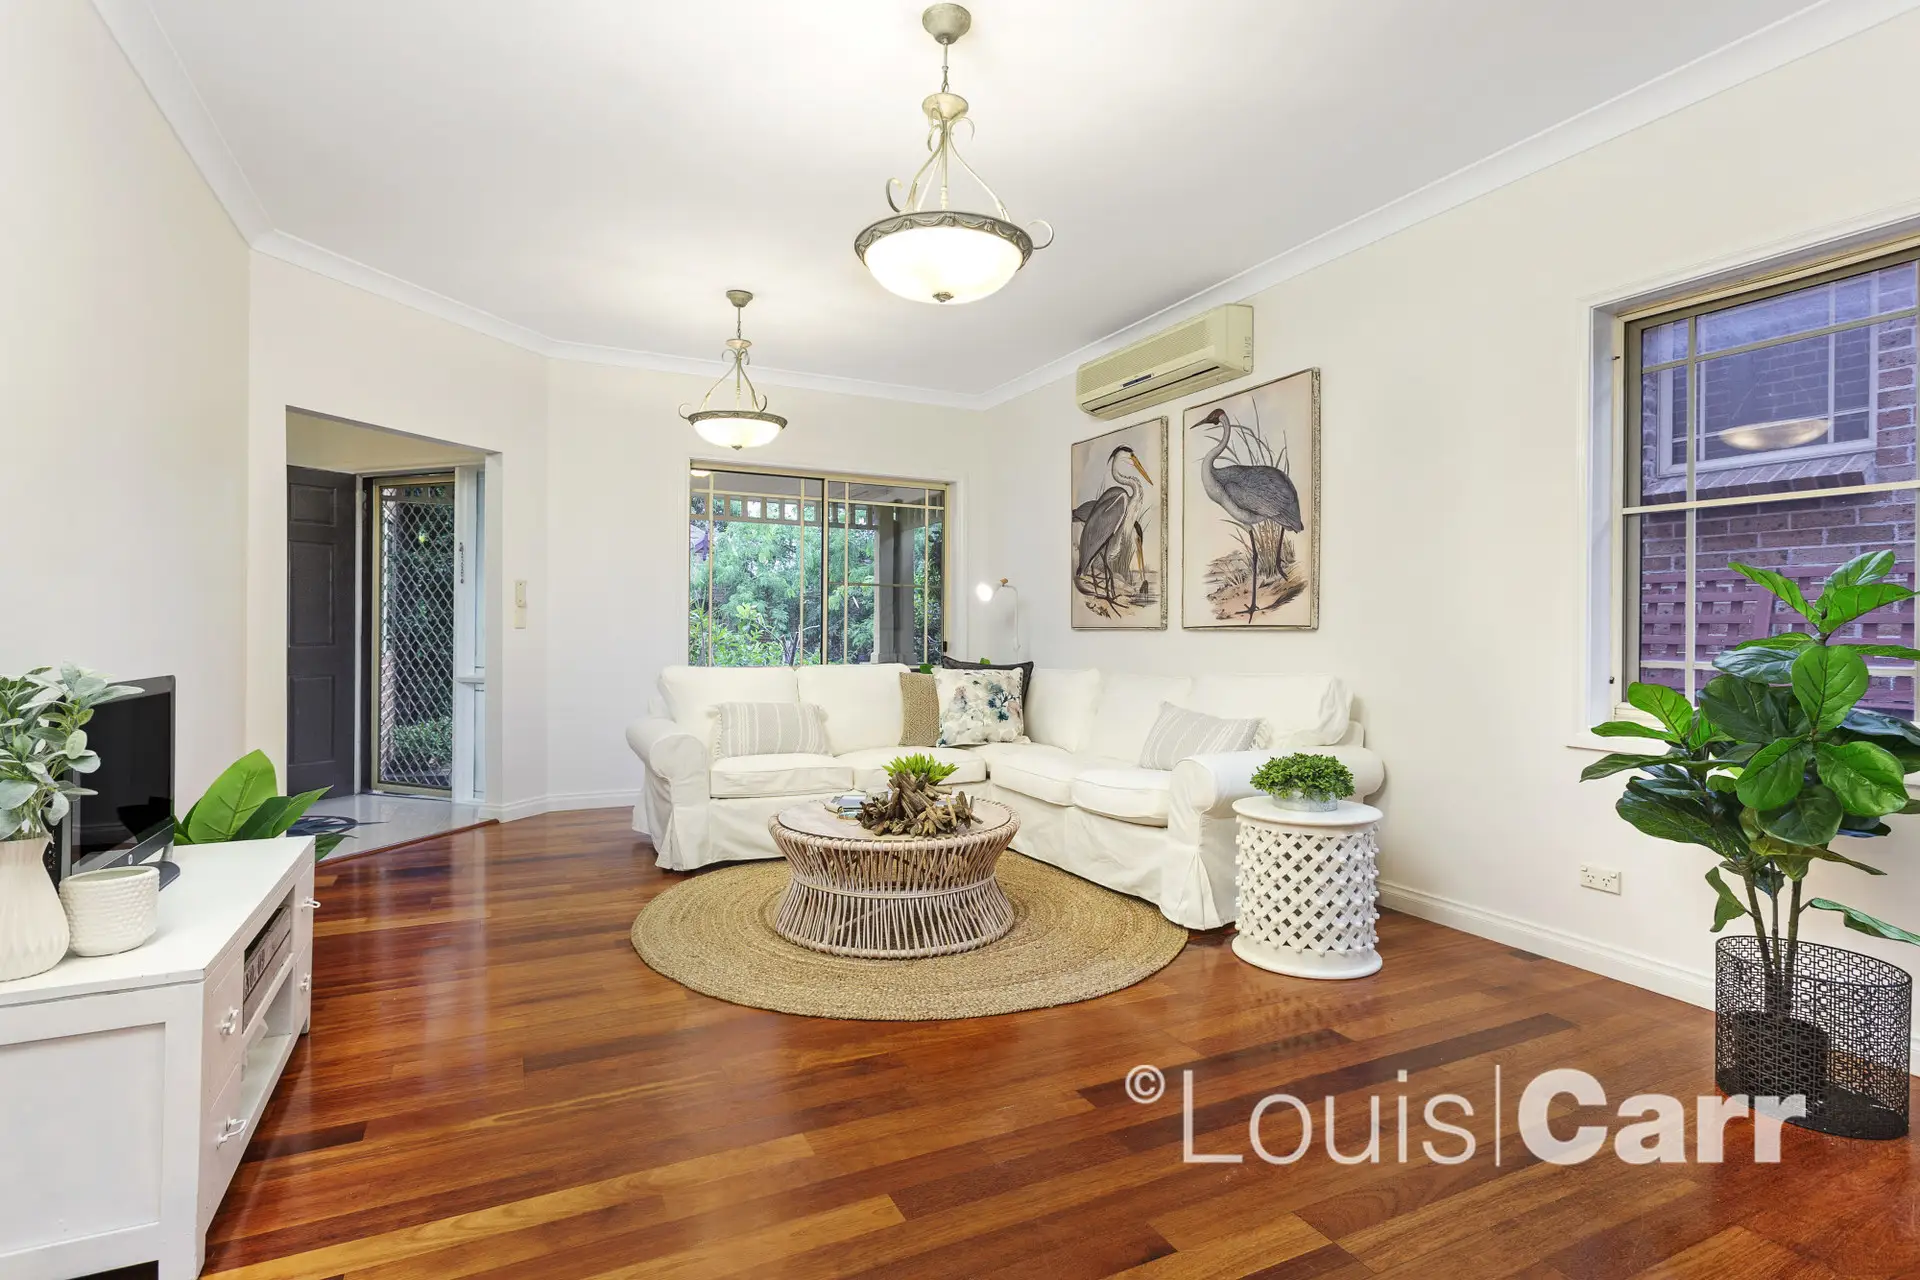 Photo #3: 5/23 Glenvale Close, West Pennant Hills - Sold by Louis Carr Real Estate